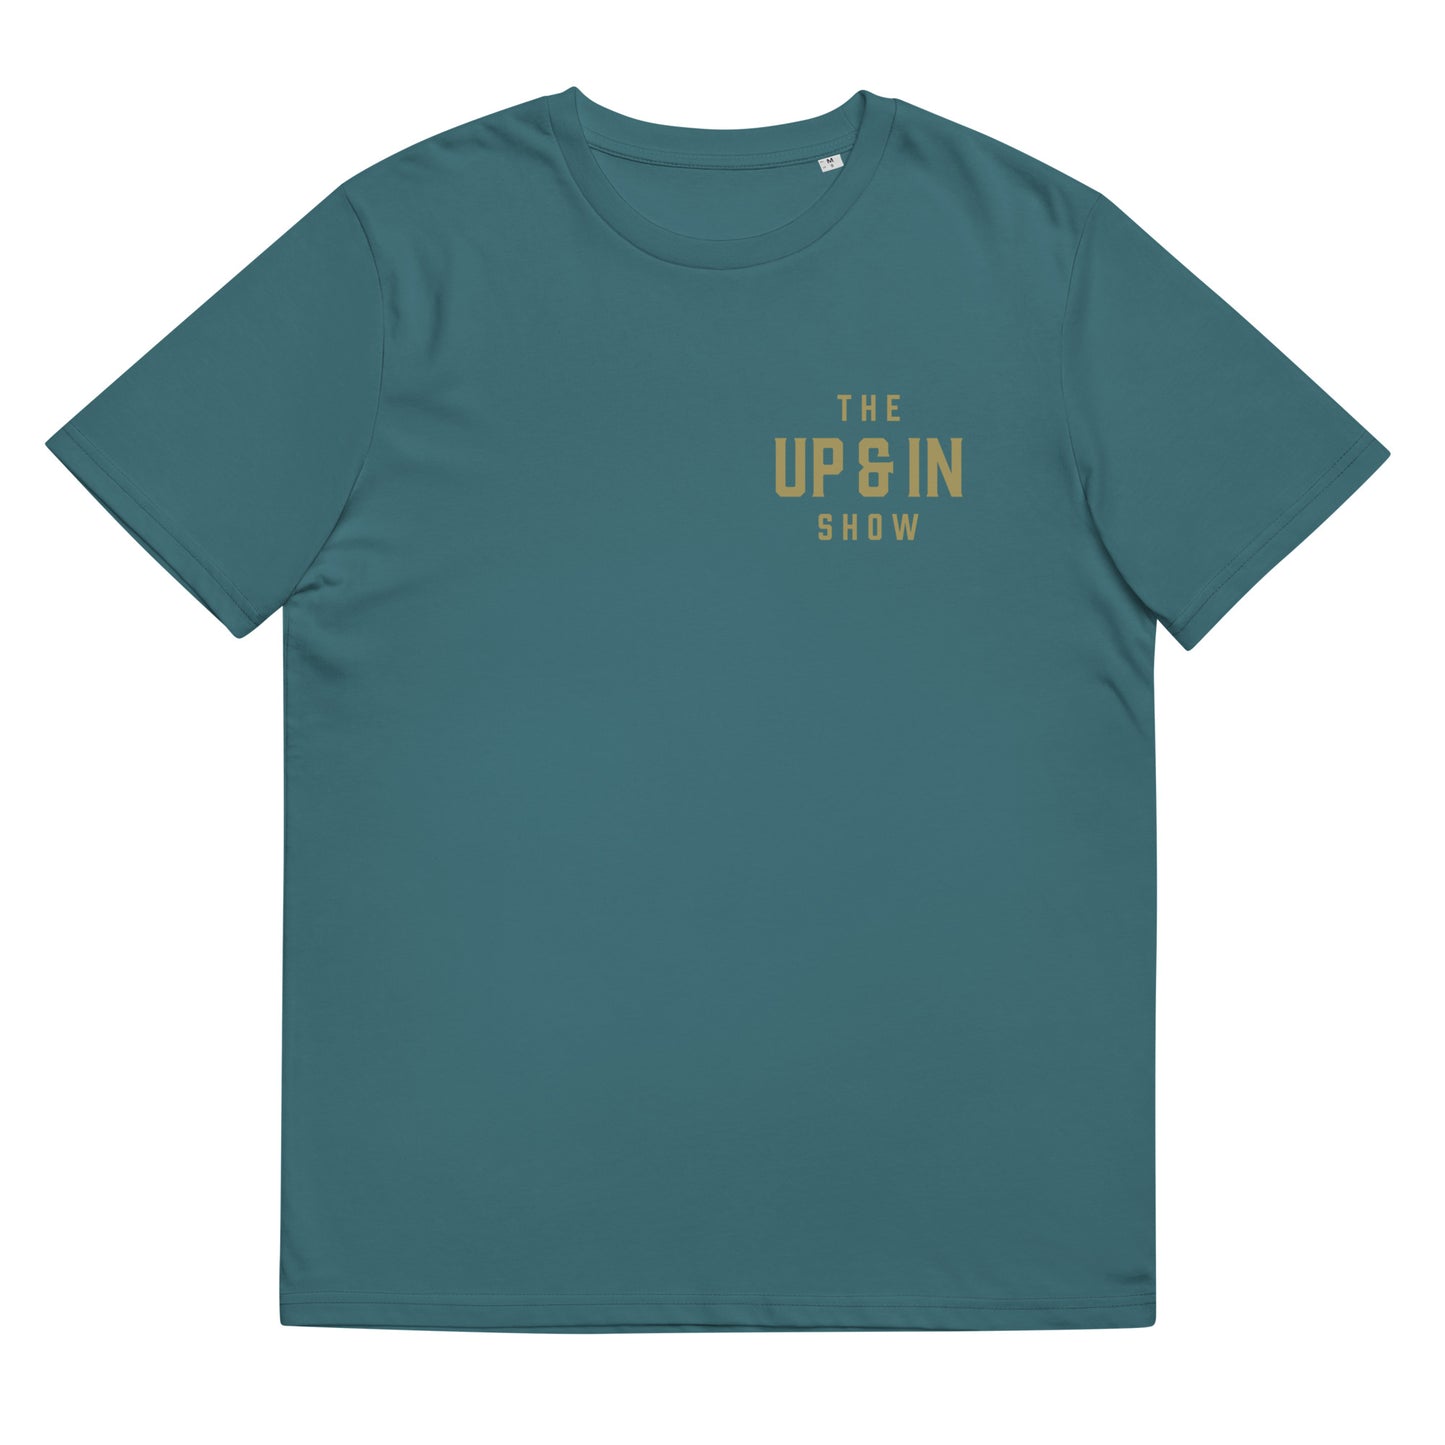 Up and In Corner Pocket Unisex organic cotton t-shirt